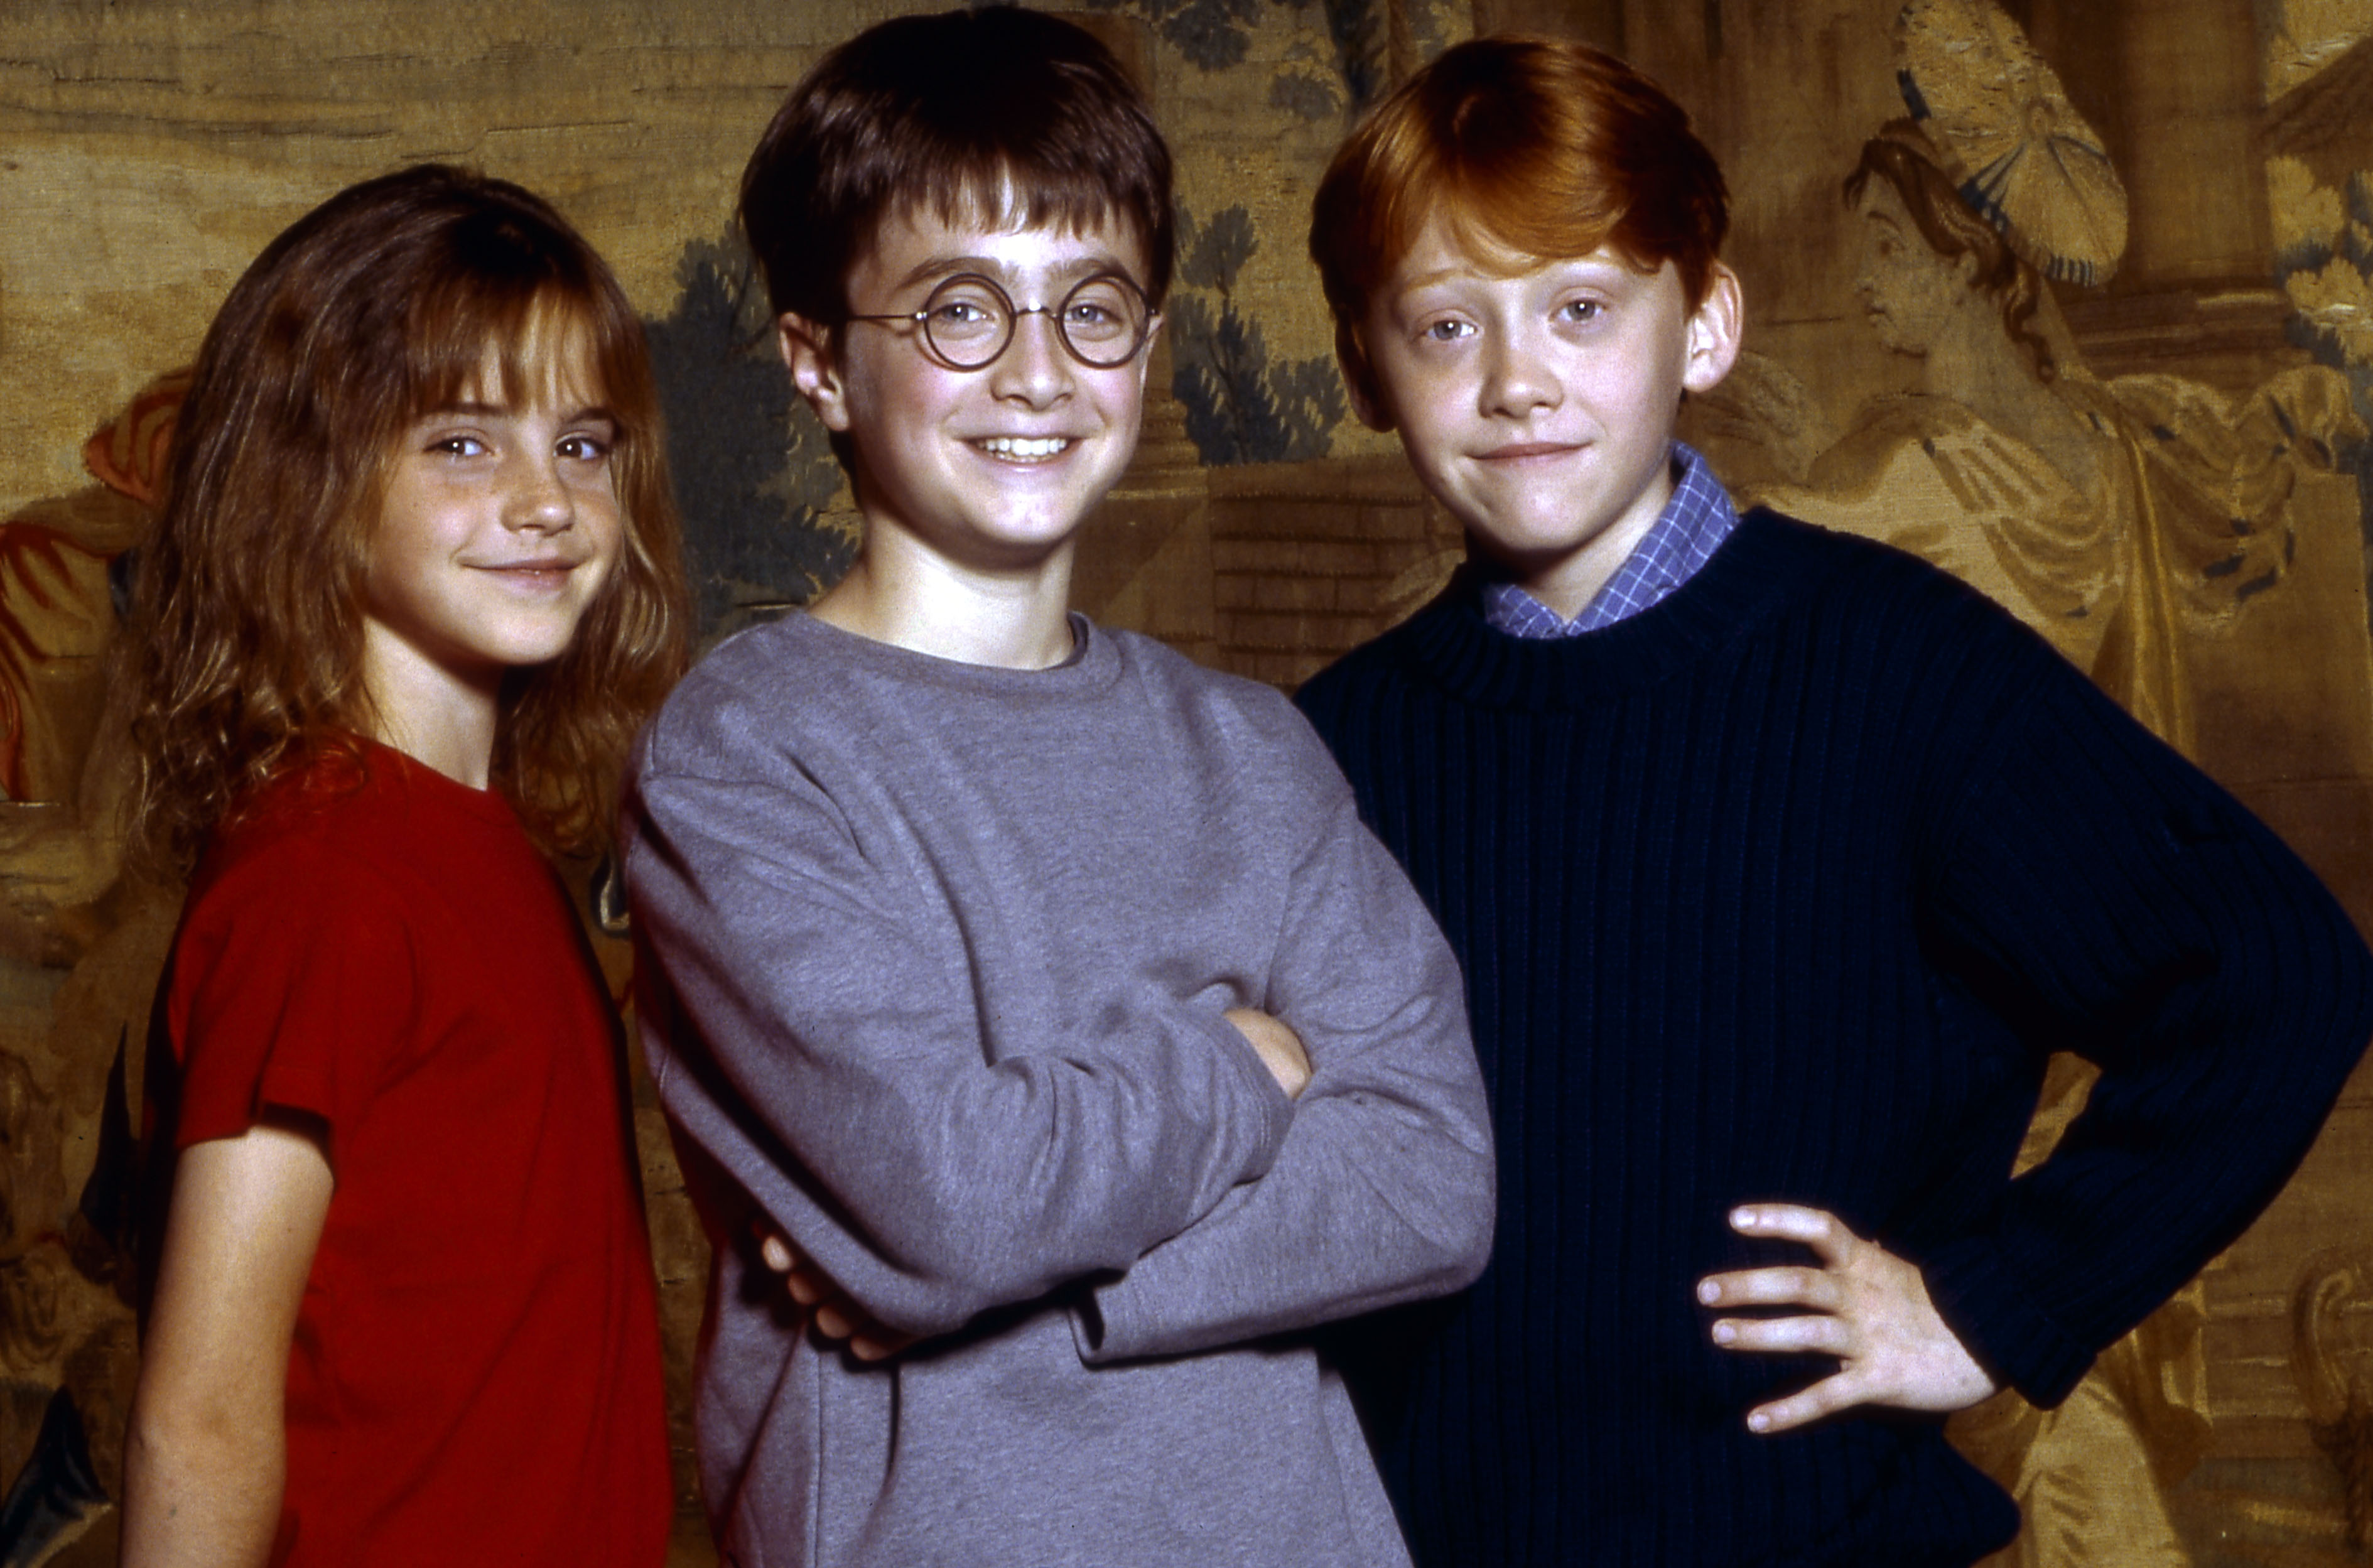 Harry Potter' Series Adaptation Official Now for HBO Max